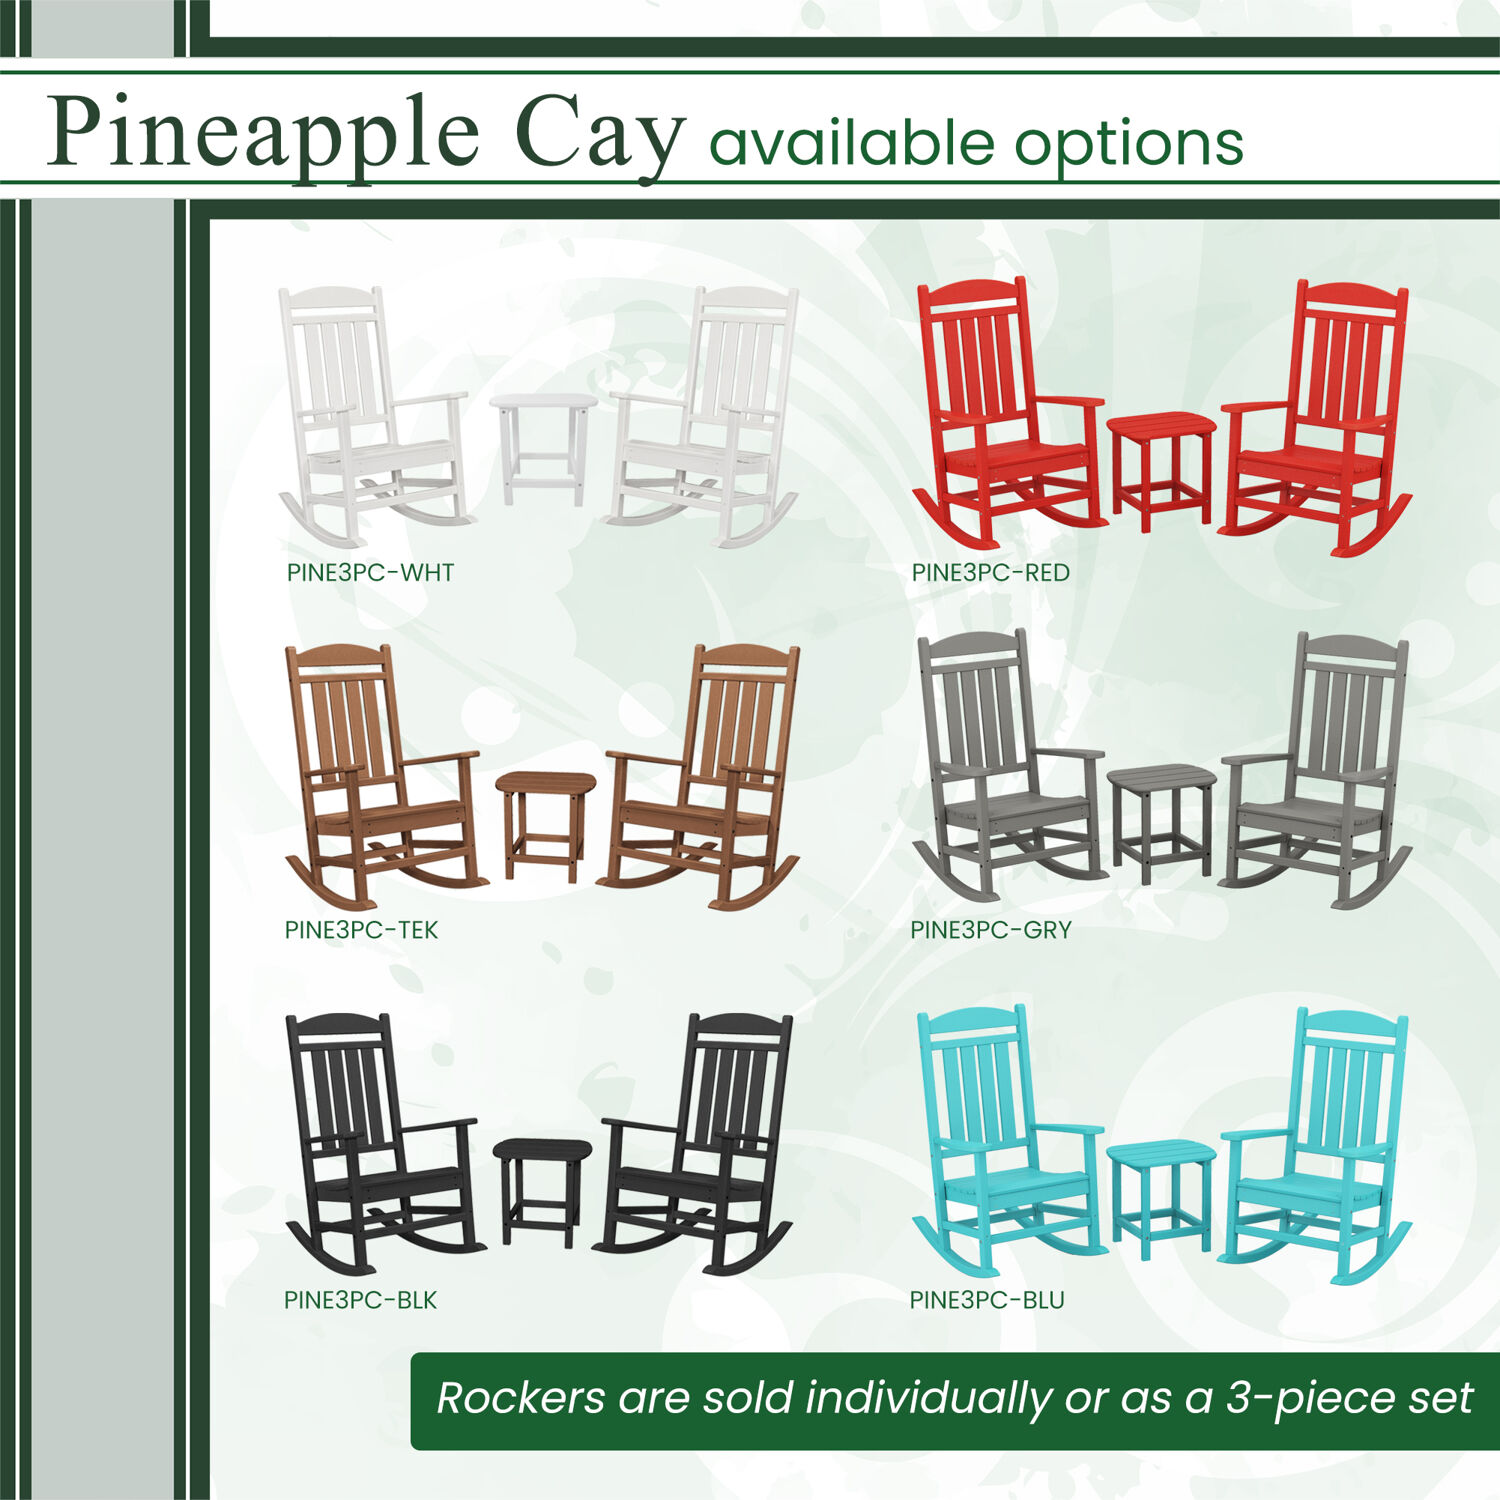 Hanover Pineapple Cay All-Weather Outdoor Patio Porch Rocker, Eco-Friendly, Recycled Material, - HVR100SR - image 4 of 5